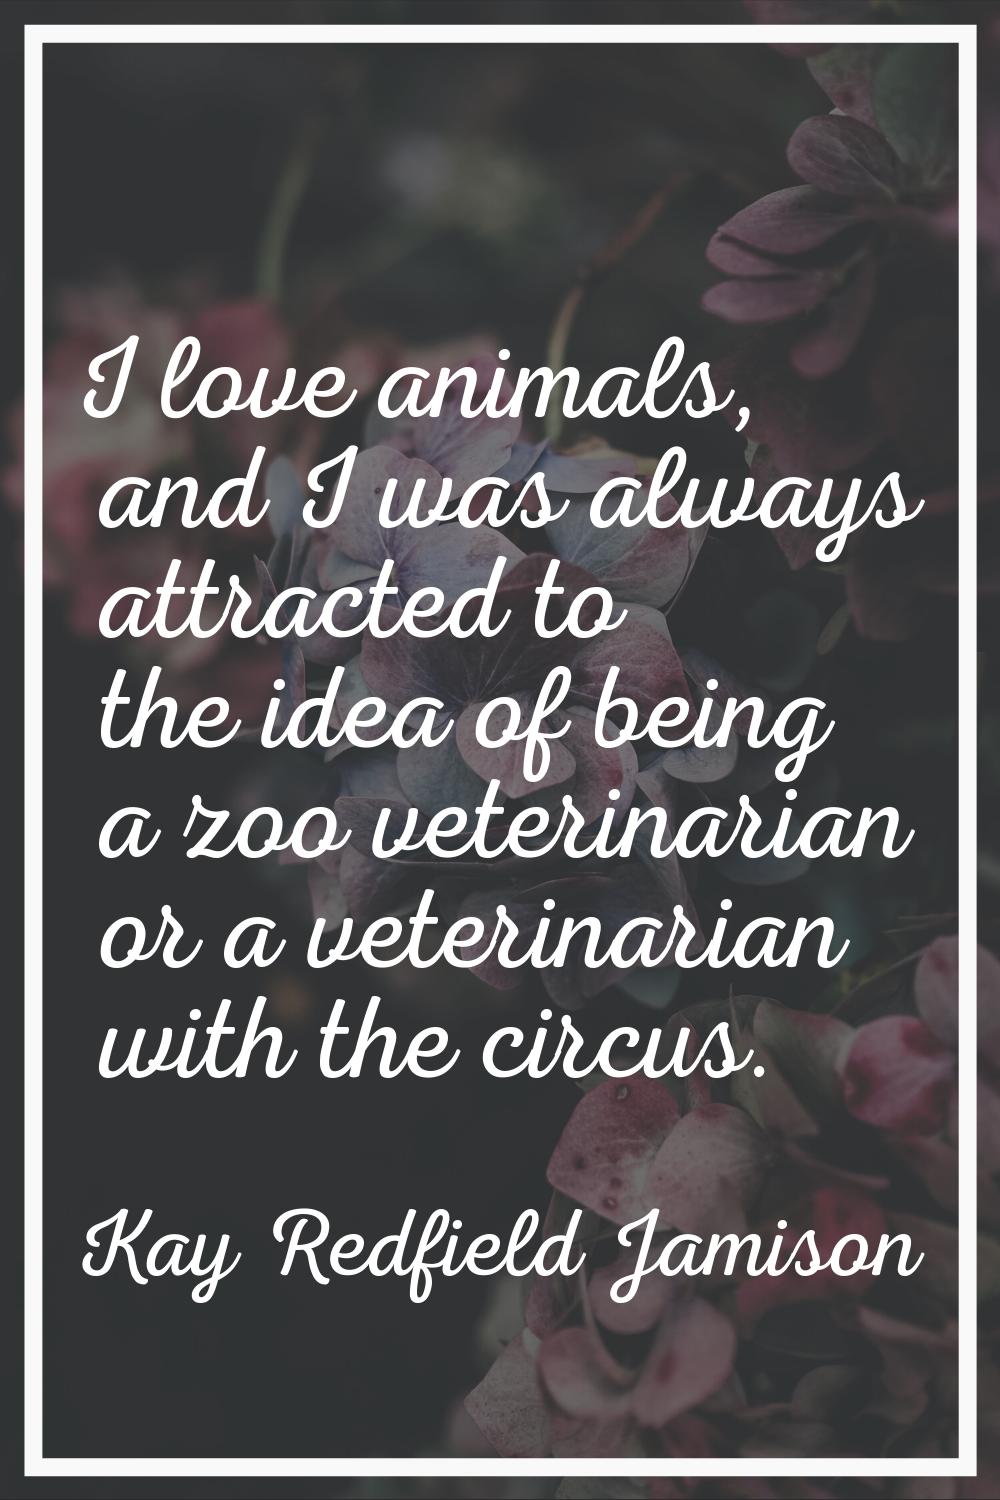 I love animals, and I was always attracted to the idea of being a zoo veterinarian or a veterinaria